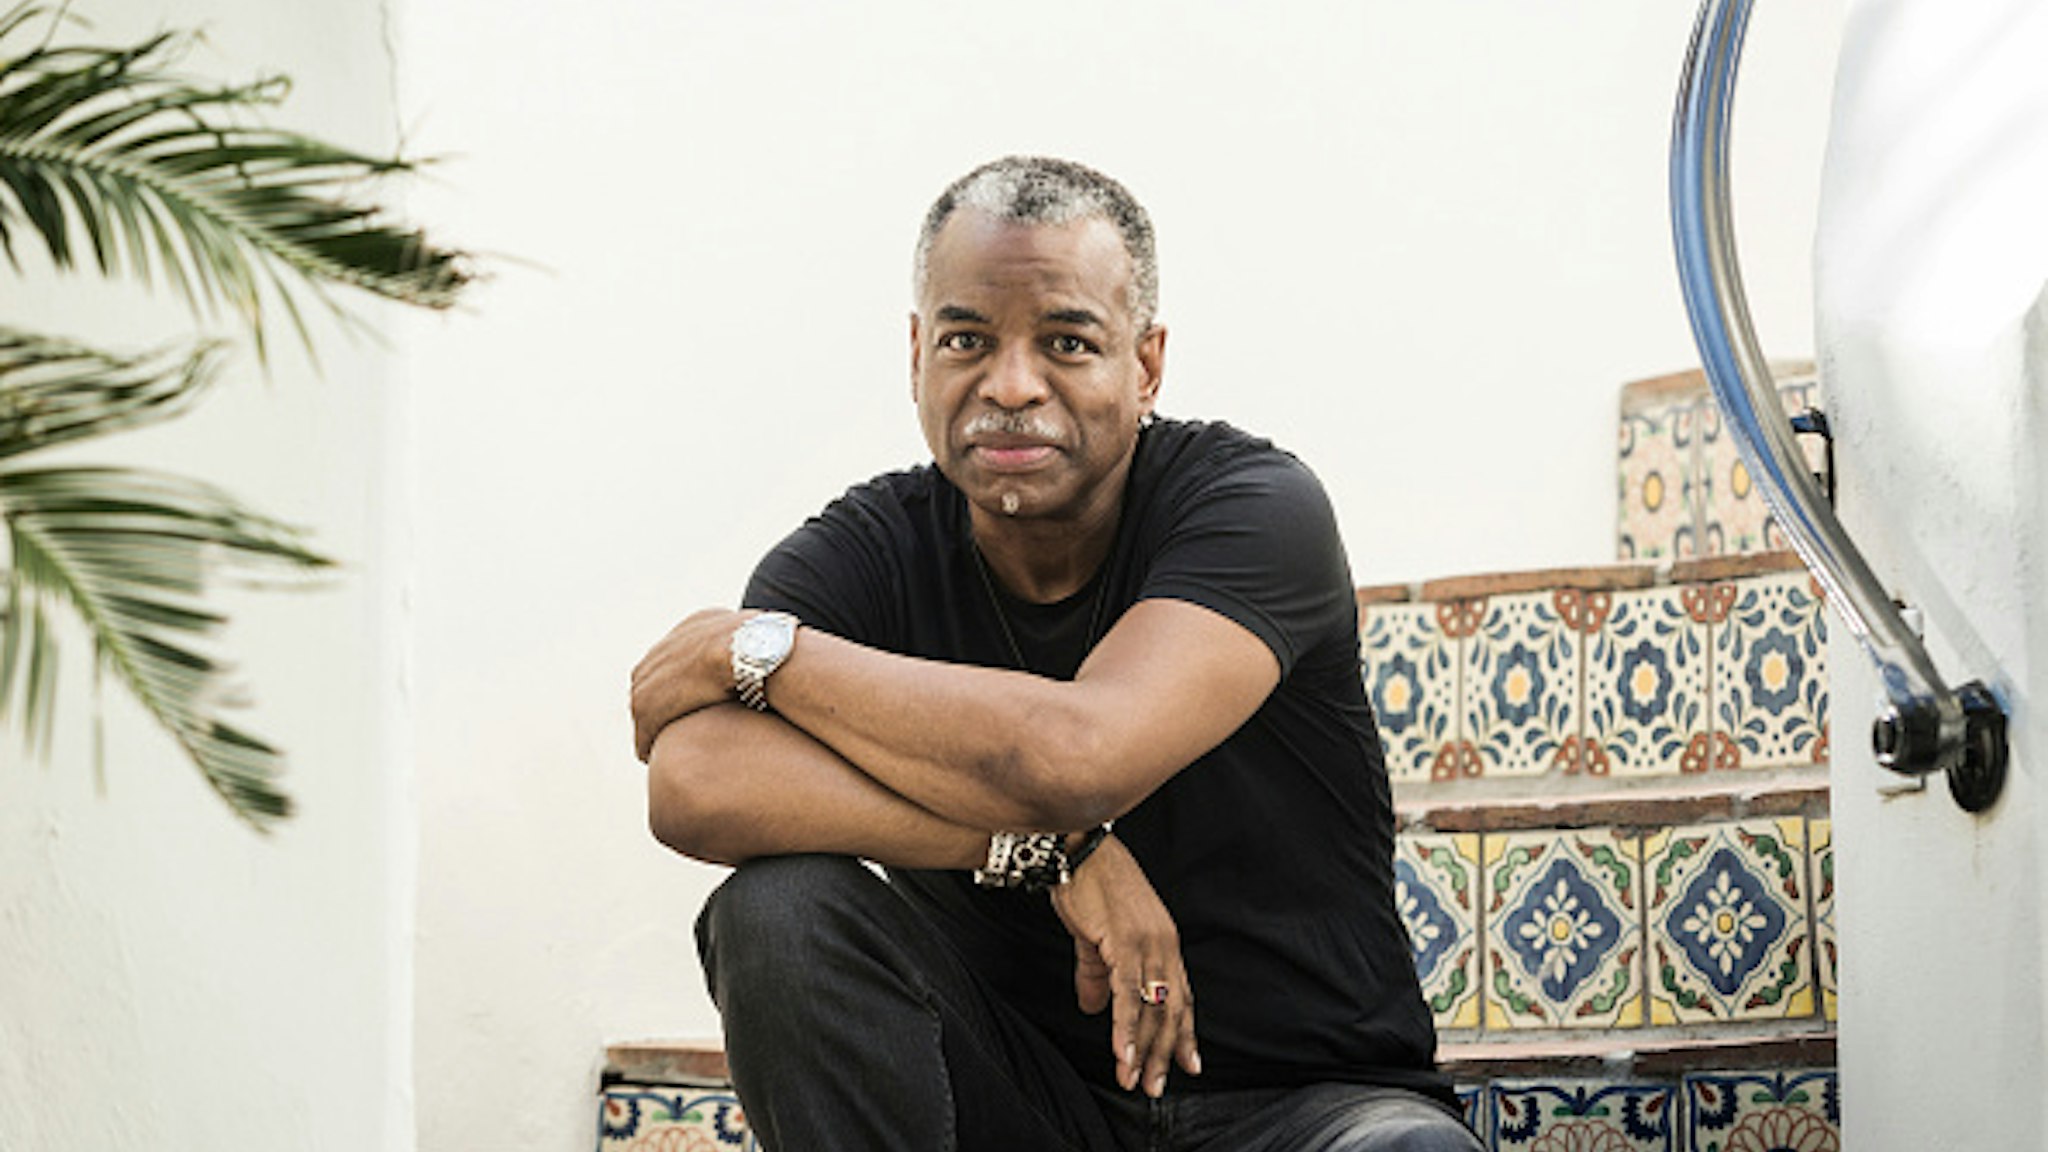 LOS ANGELES, CA - April 28, 2020: Actor, director and podcaster LeVar Burton poses for a portrait outside of his home on Tuesday afternoon.